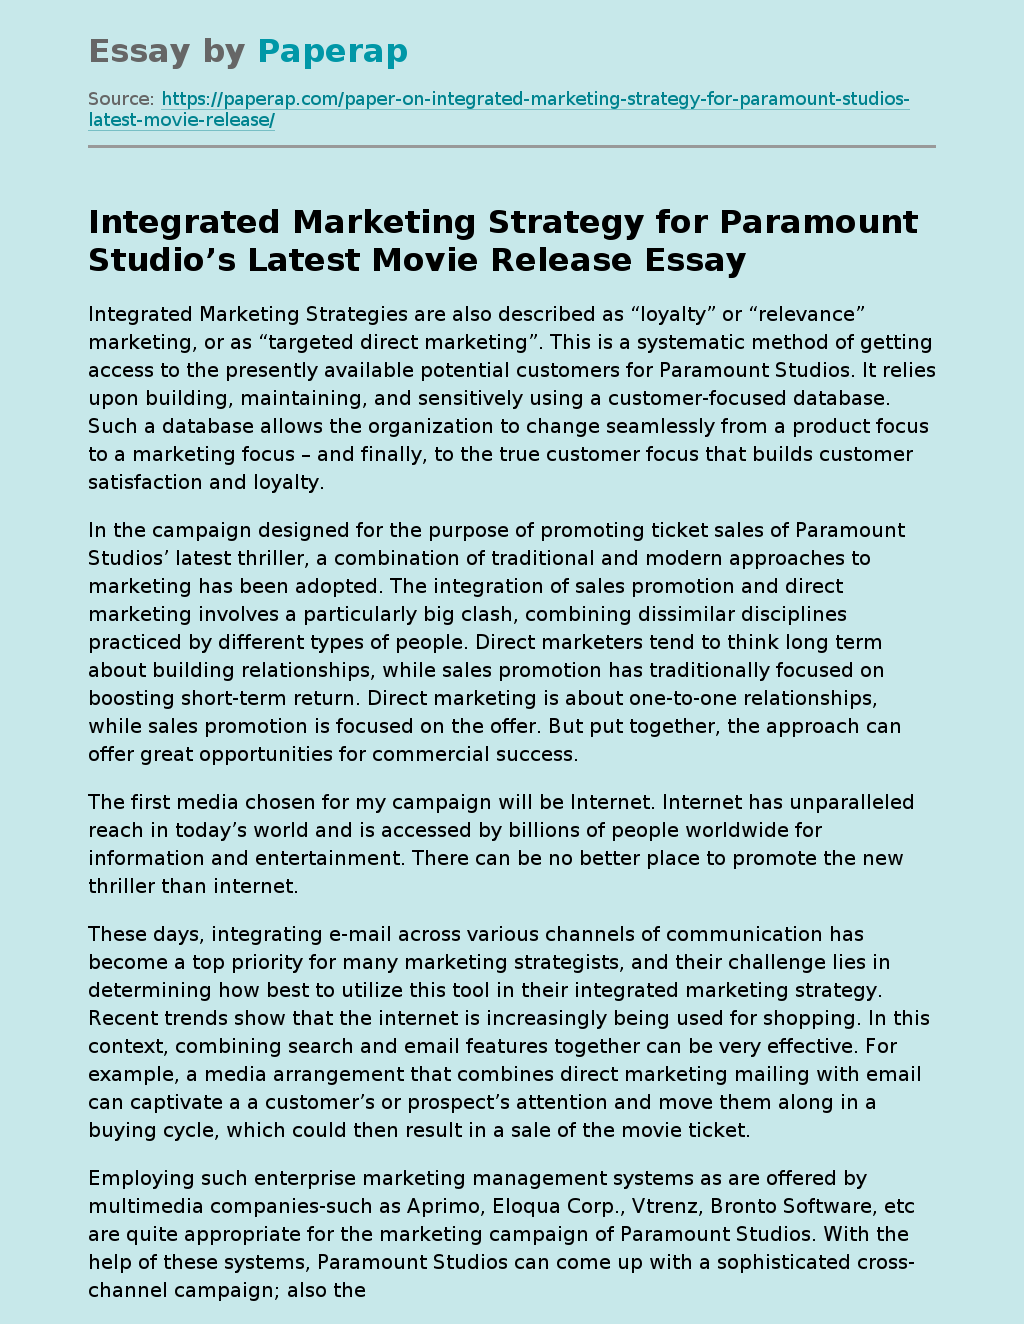 Integrated Marketing Strategy for Paramount Studio’s Latest Movie Release